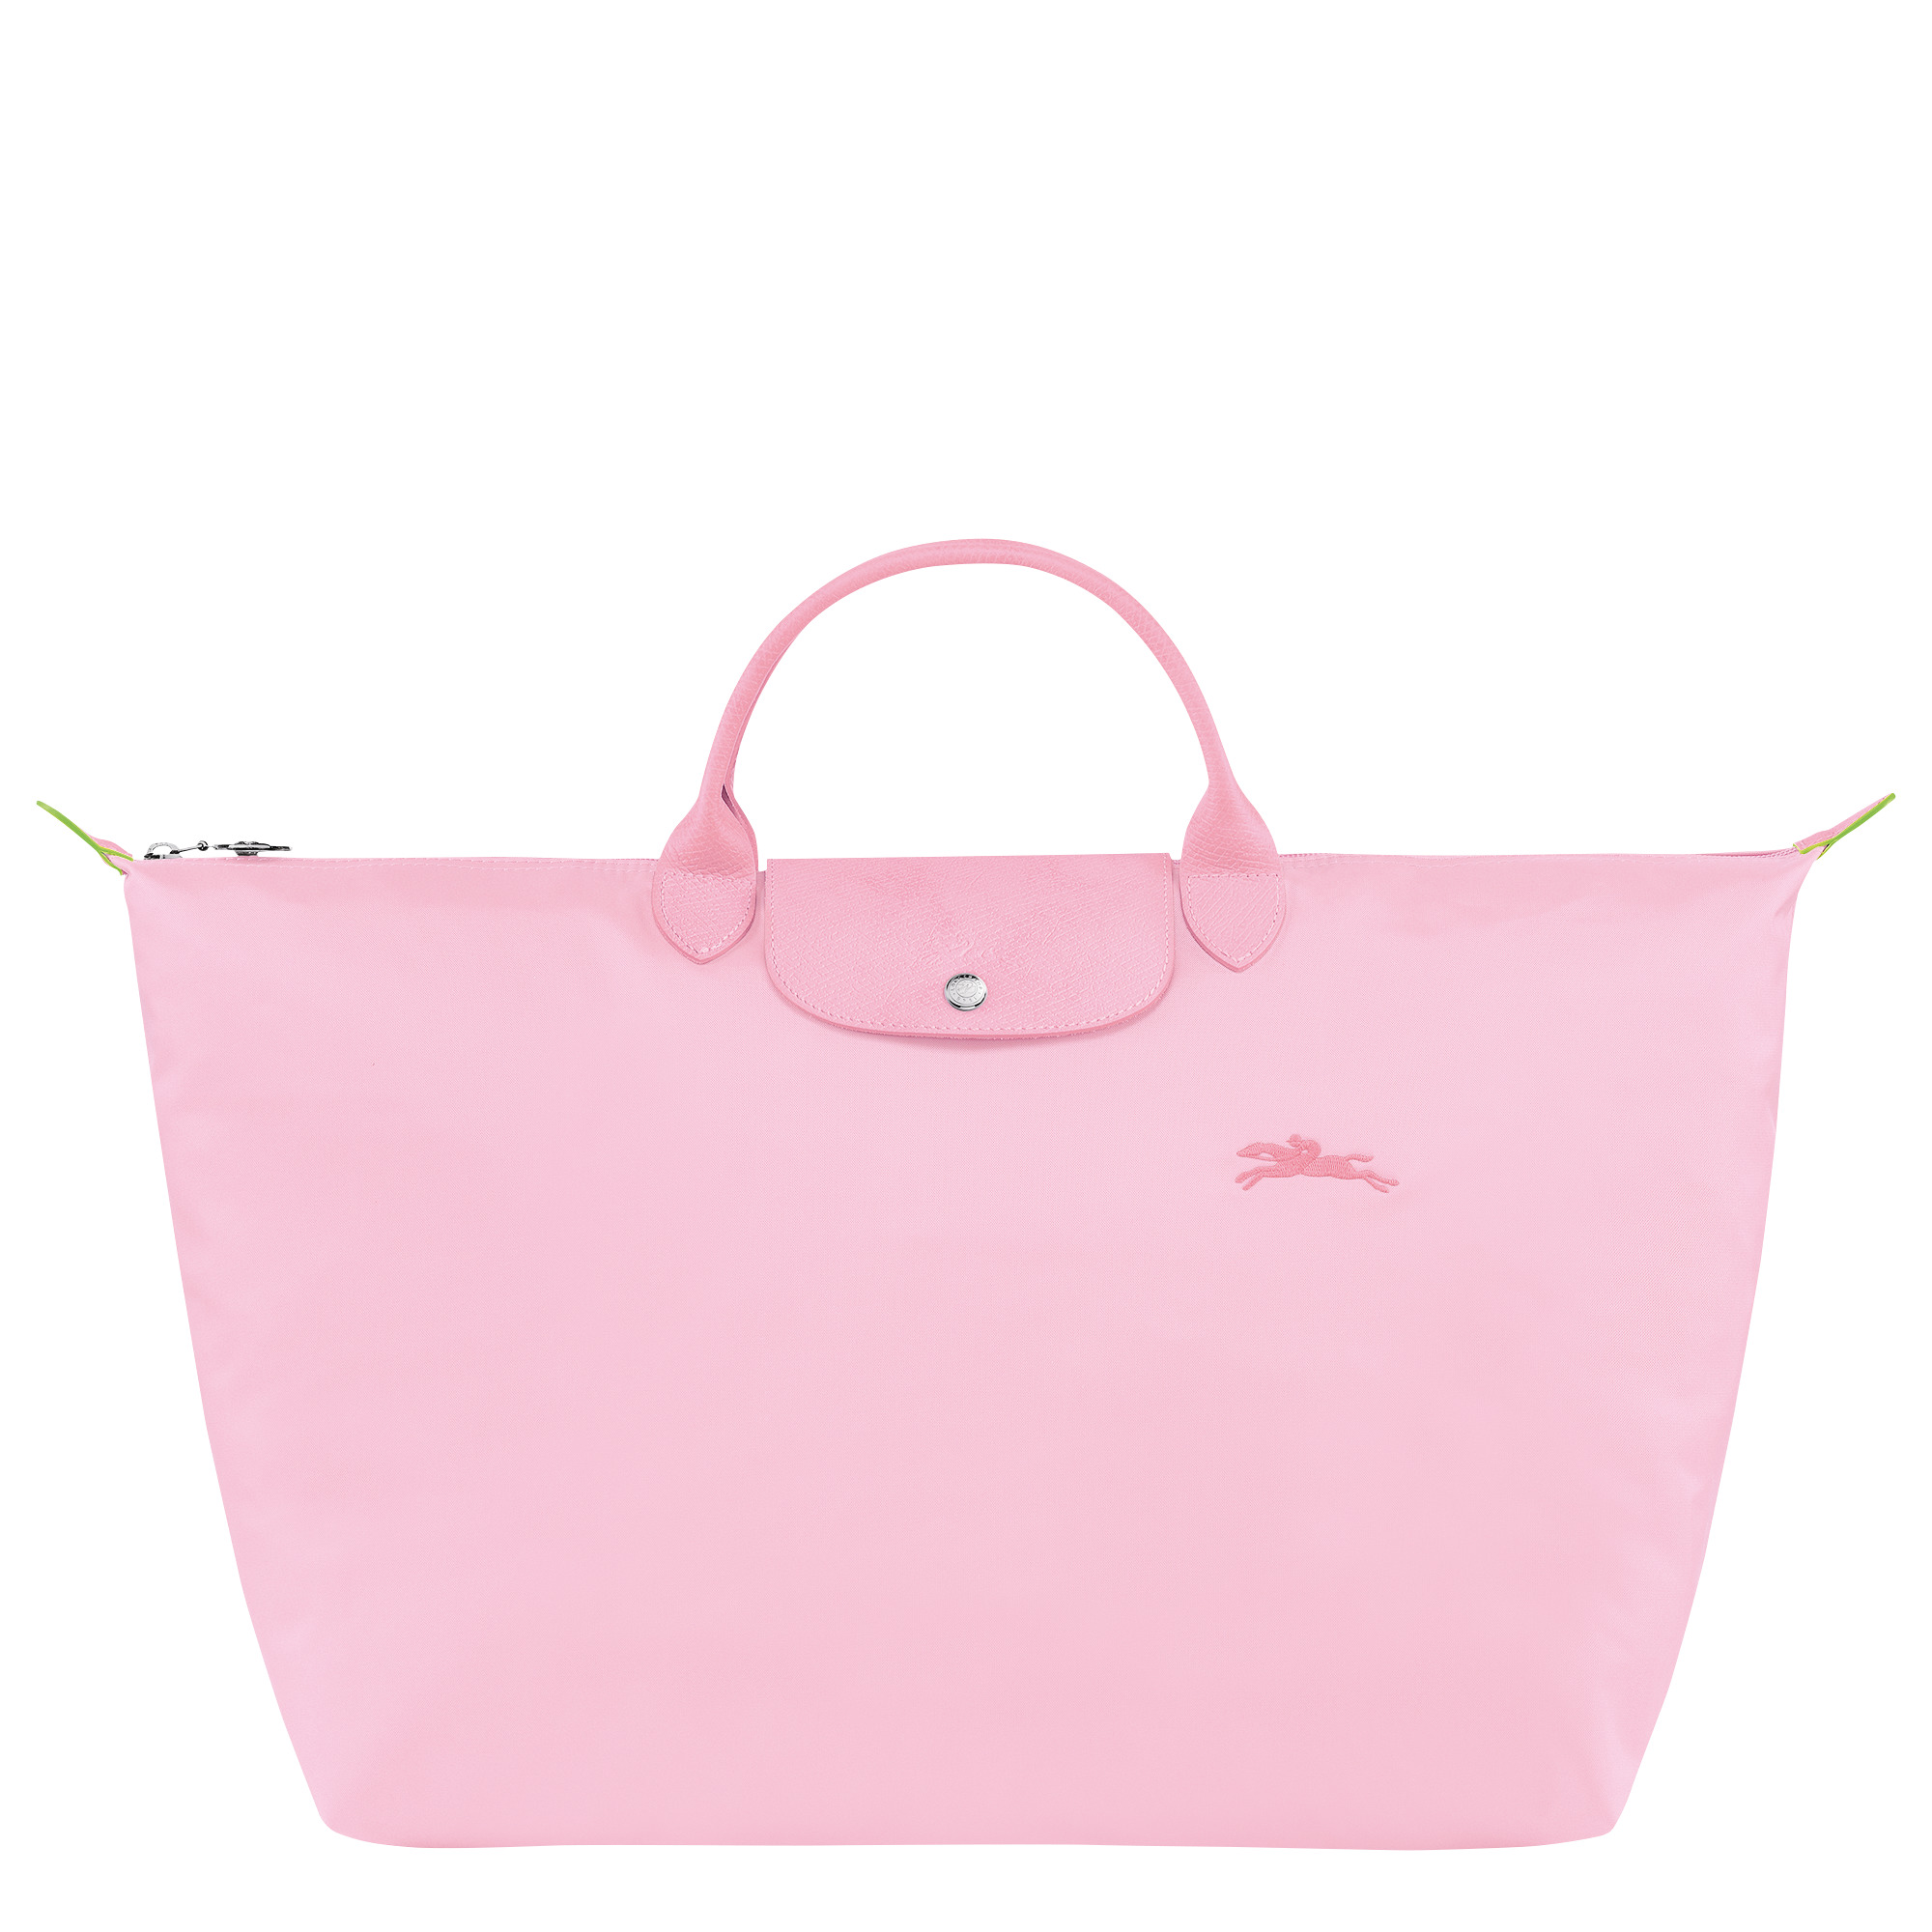 The Timeless Longchamp Le Pliage Goes Green In A Commitment To